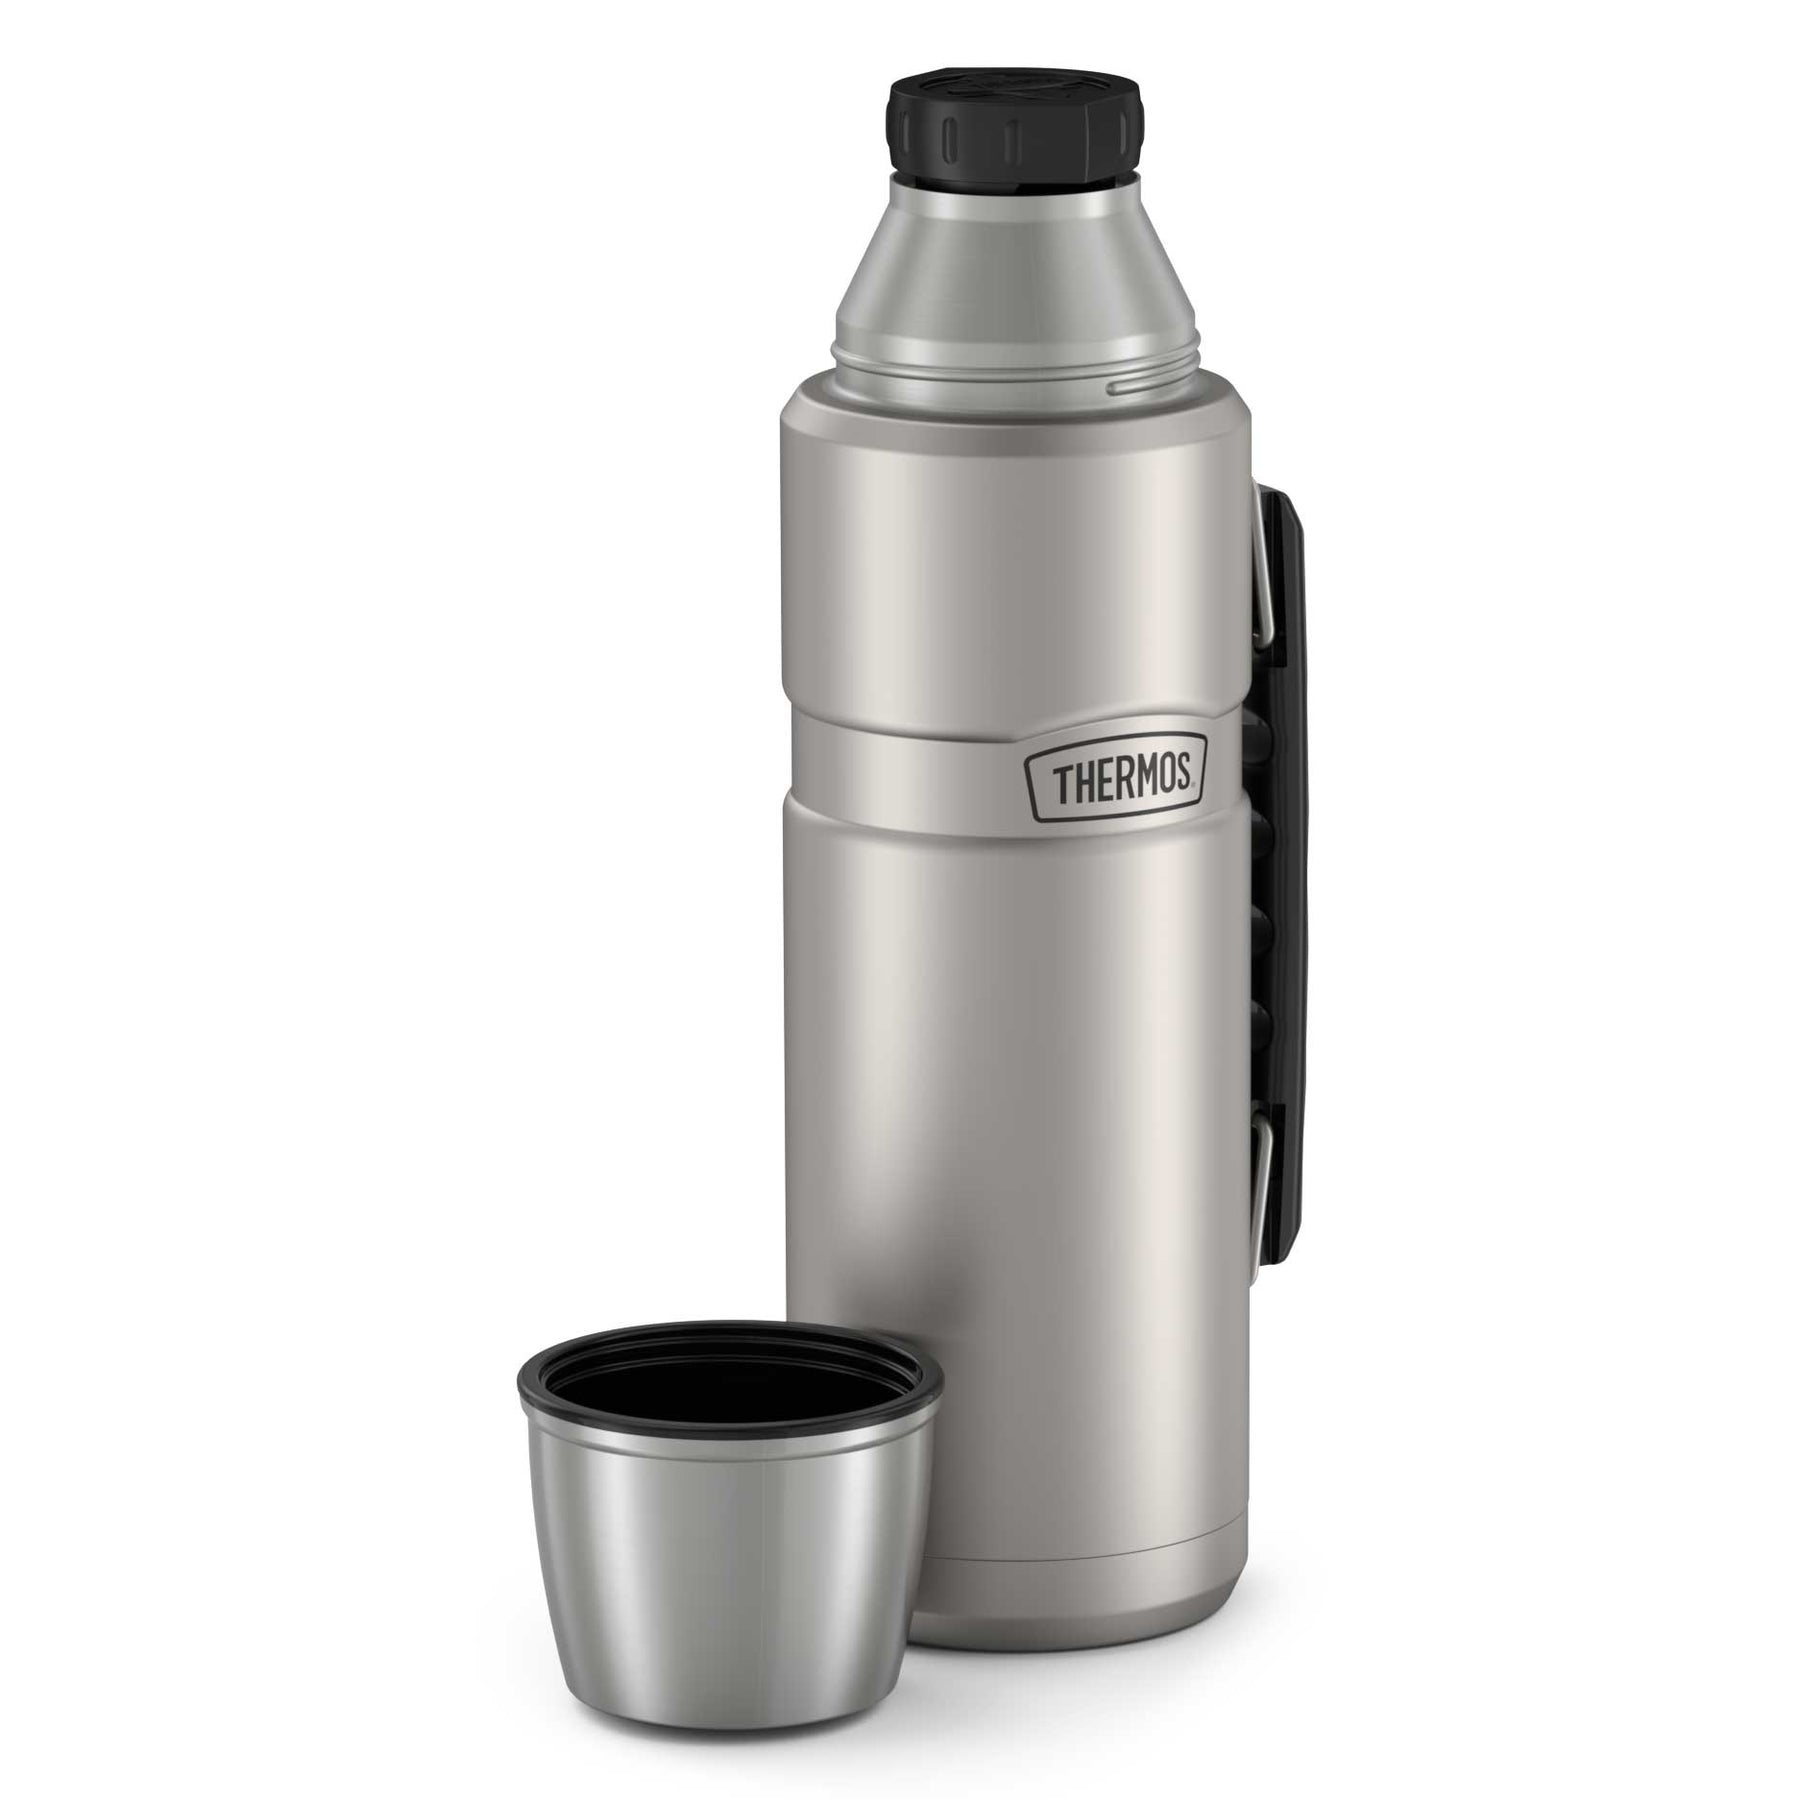 Excellent condition stainless steel thermos bottle for hot/cold - household  items - by owner - housewares sale 